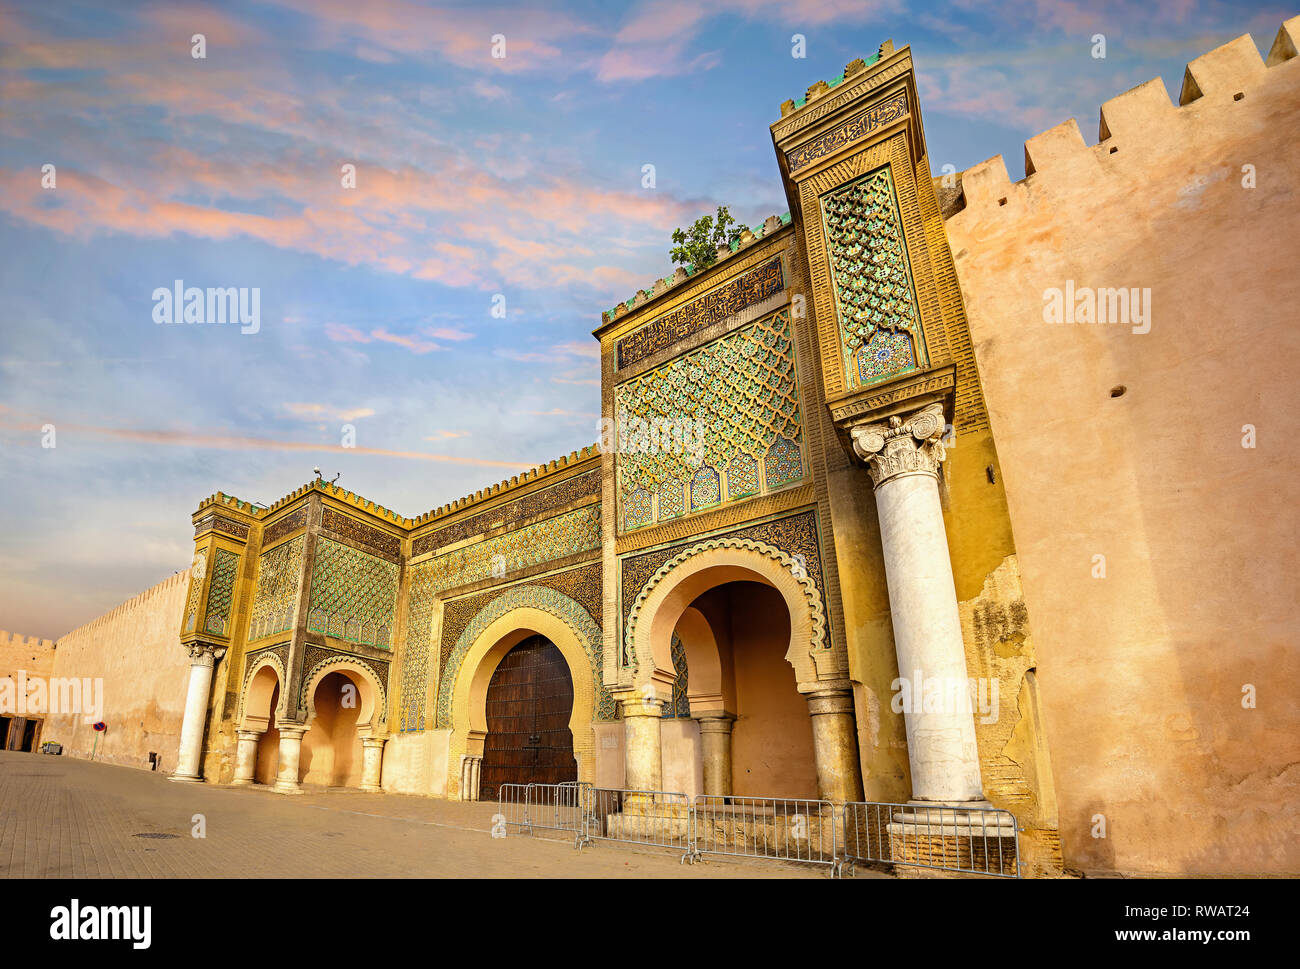 Ancient gate and walls of Bab El-Mansour in Meknes. Morocco, North Africa Stock Photo